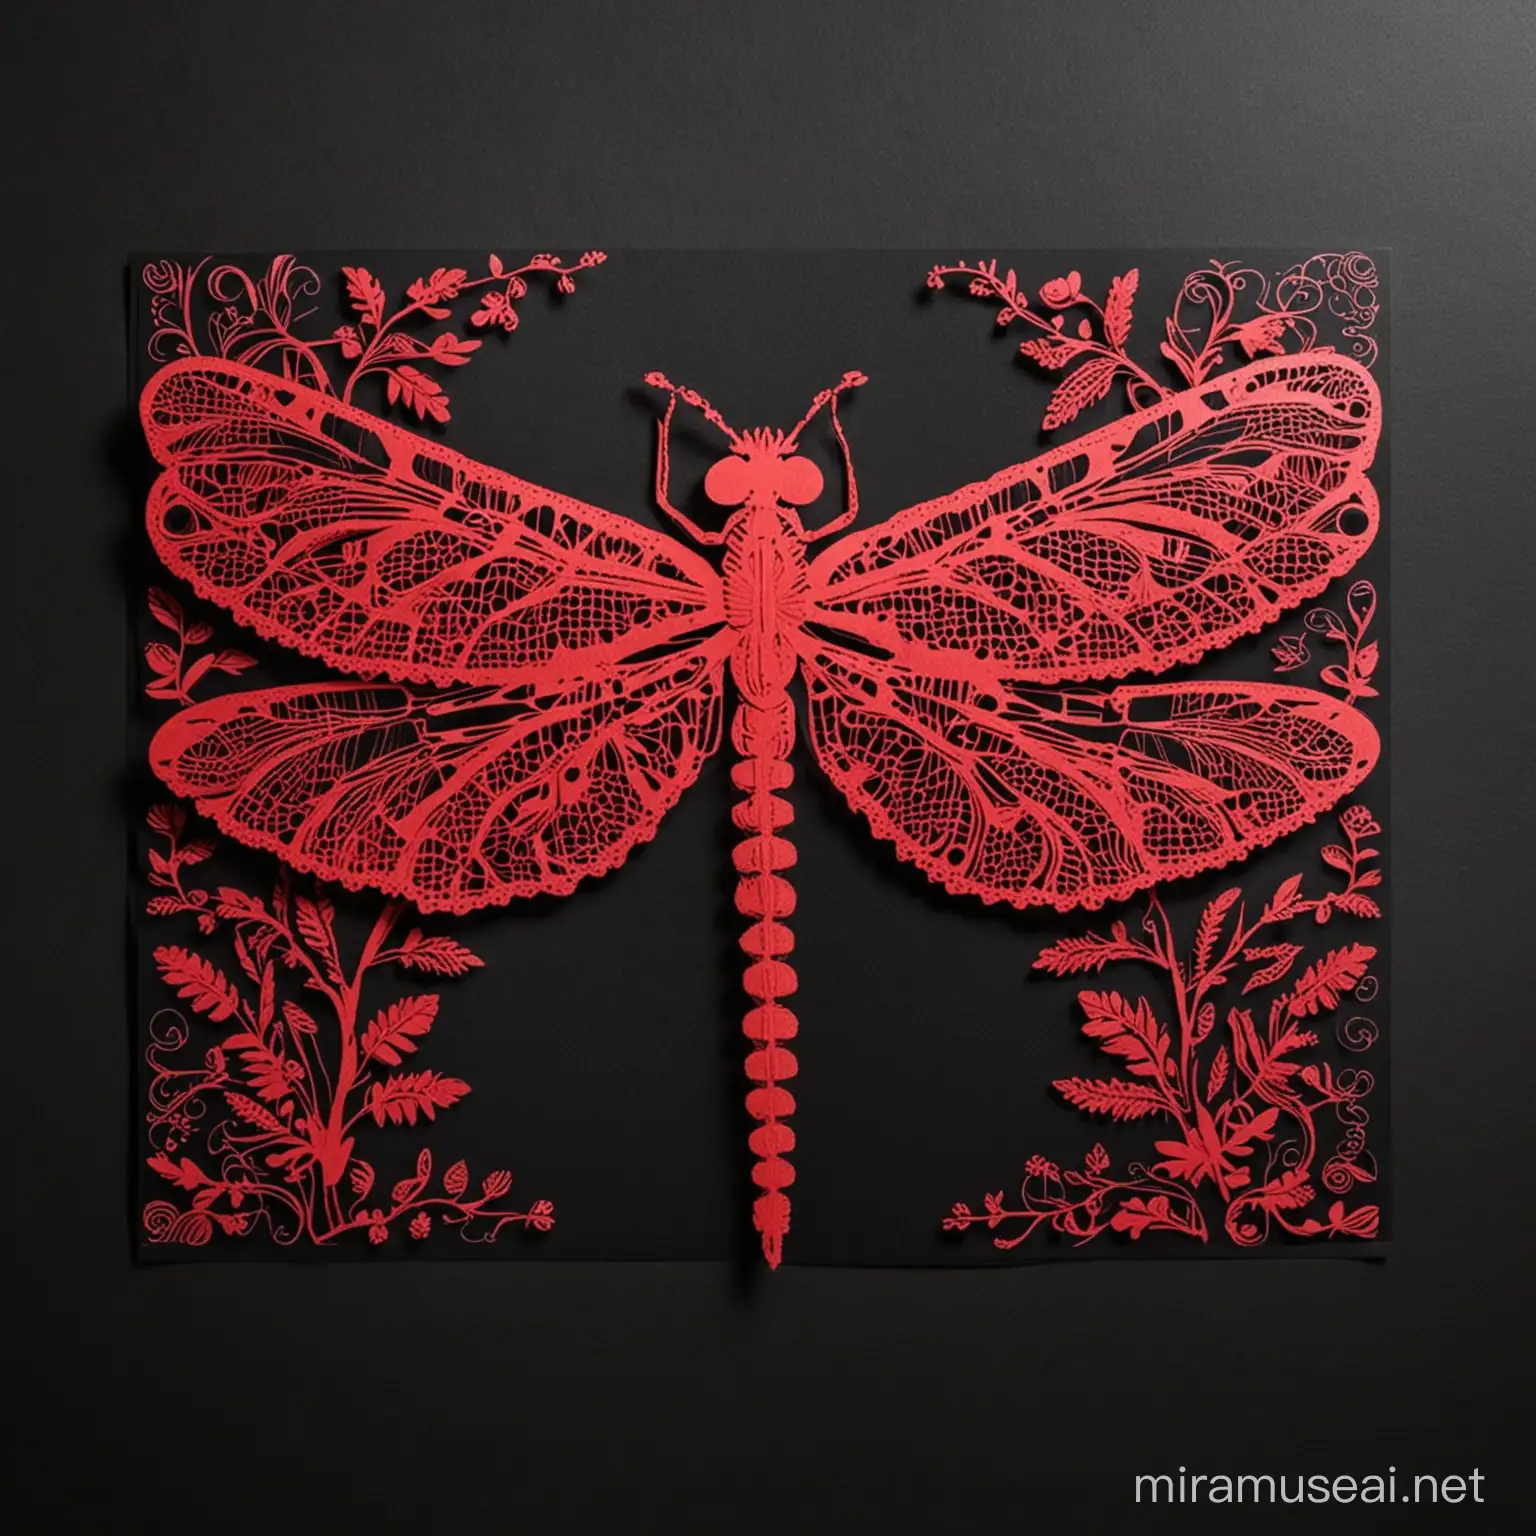 papel picado of dragonfly, red on black, 2D flat paper, handcut paper, simple design.